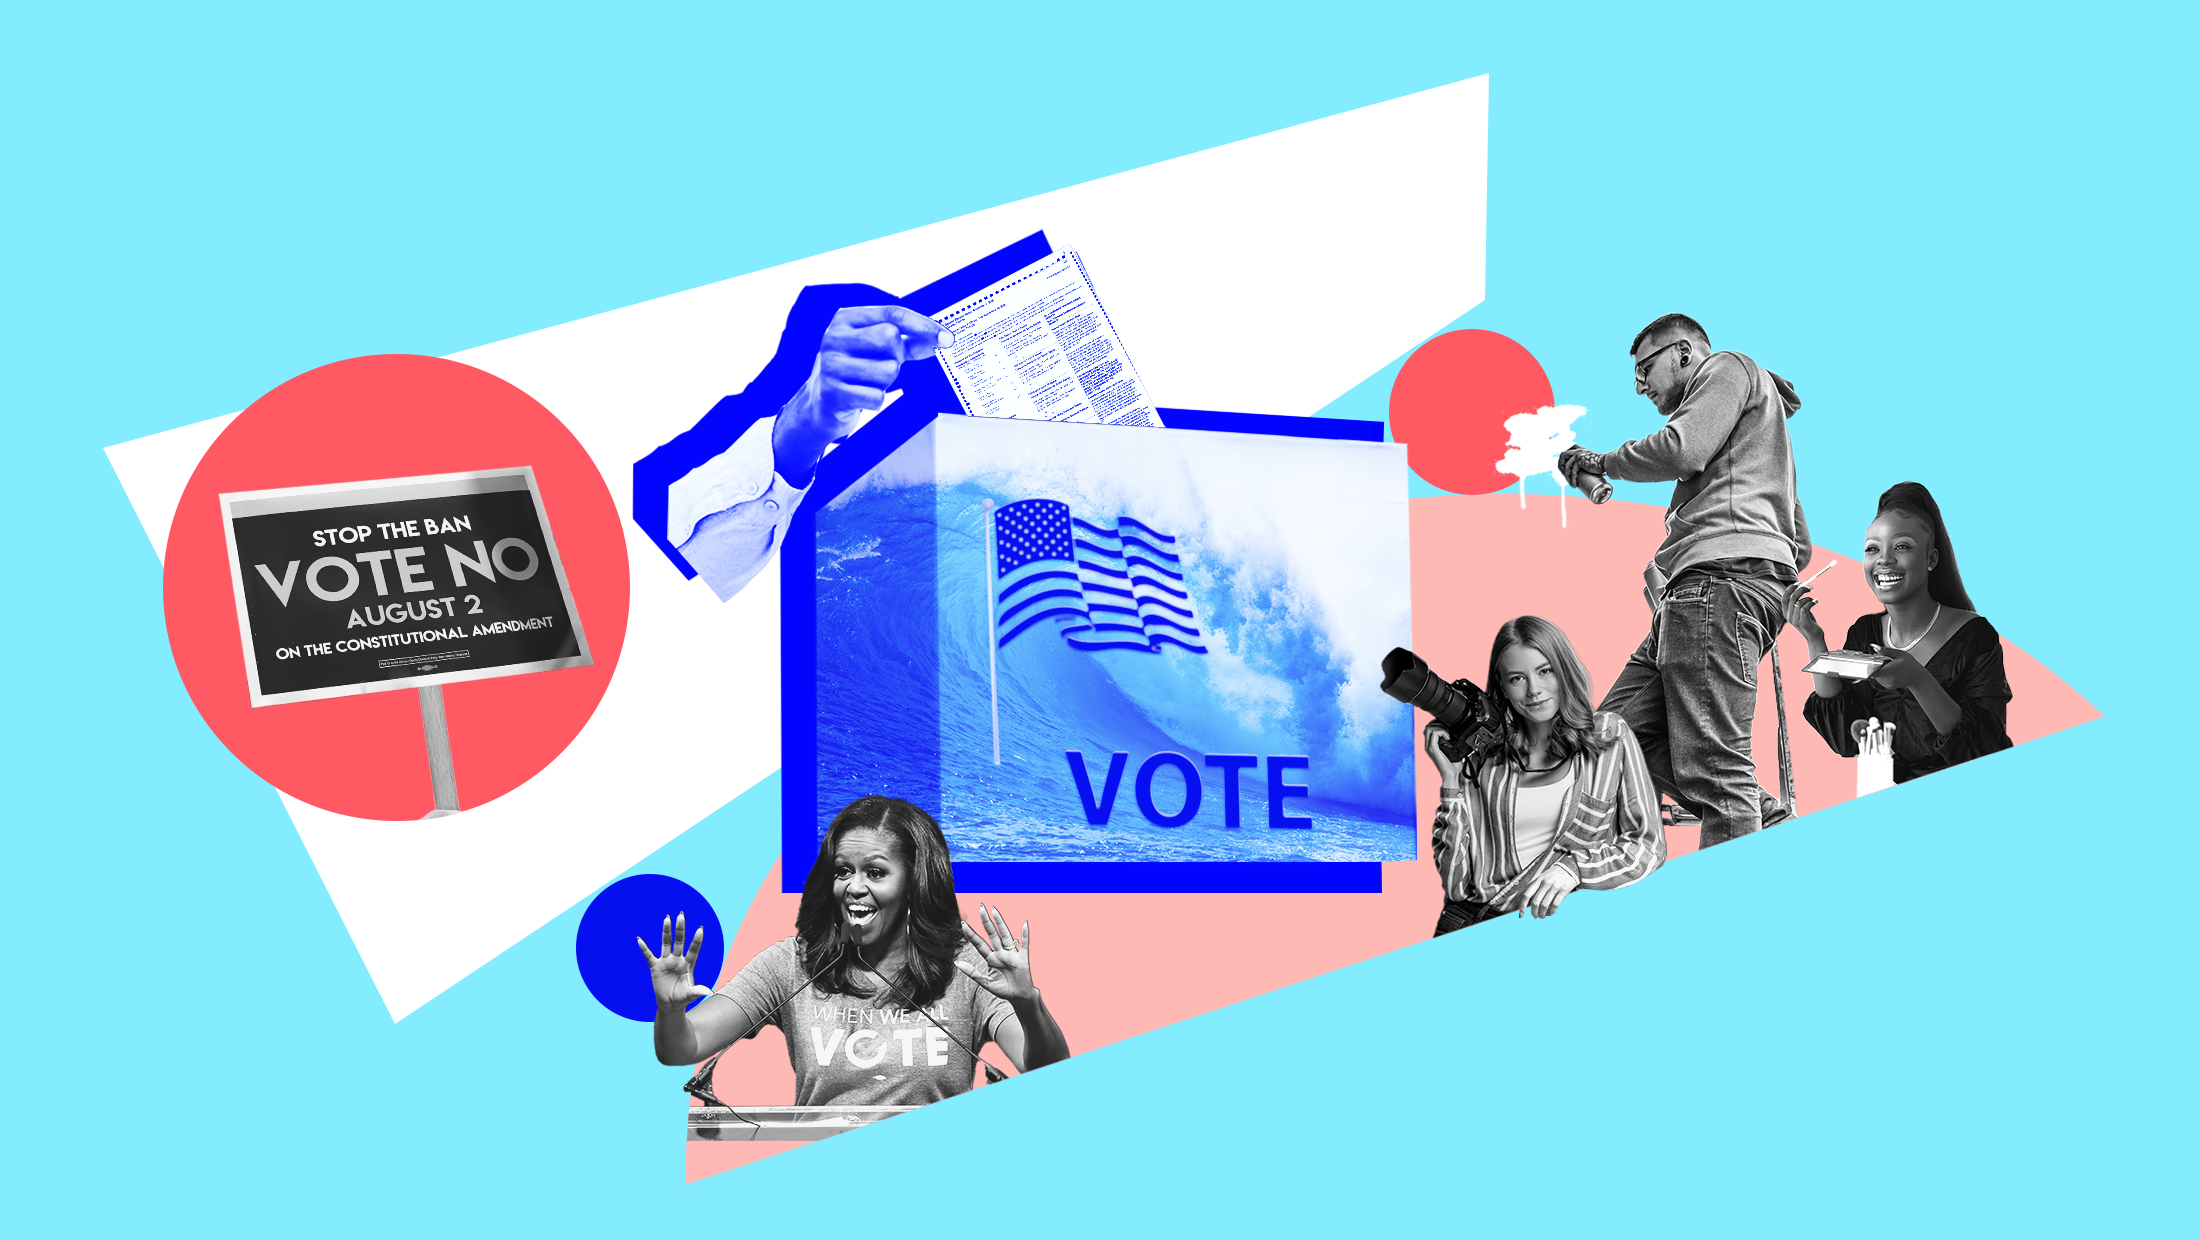 Light blue background with image of blue wave, an American flag and the word "VOTE" laid over a ballot box and someone inserting their ballot into the box, a black and white image of Michelle Obama wearing a shirt that reads "WHEN WE ALL VOTE," a black and white image of a sign that reads "STOP THE BAN VOTE NO ON THE CONSTITUTIONAL AMENDMENT AUGUST 2," and a black and white images of people with a camera, painting and spray painting.